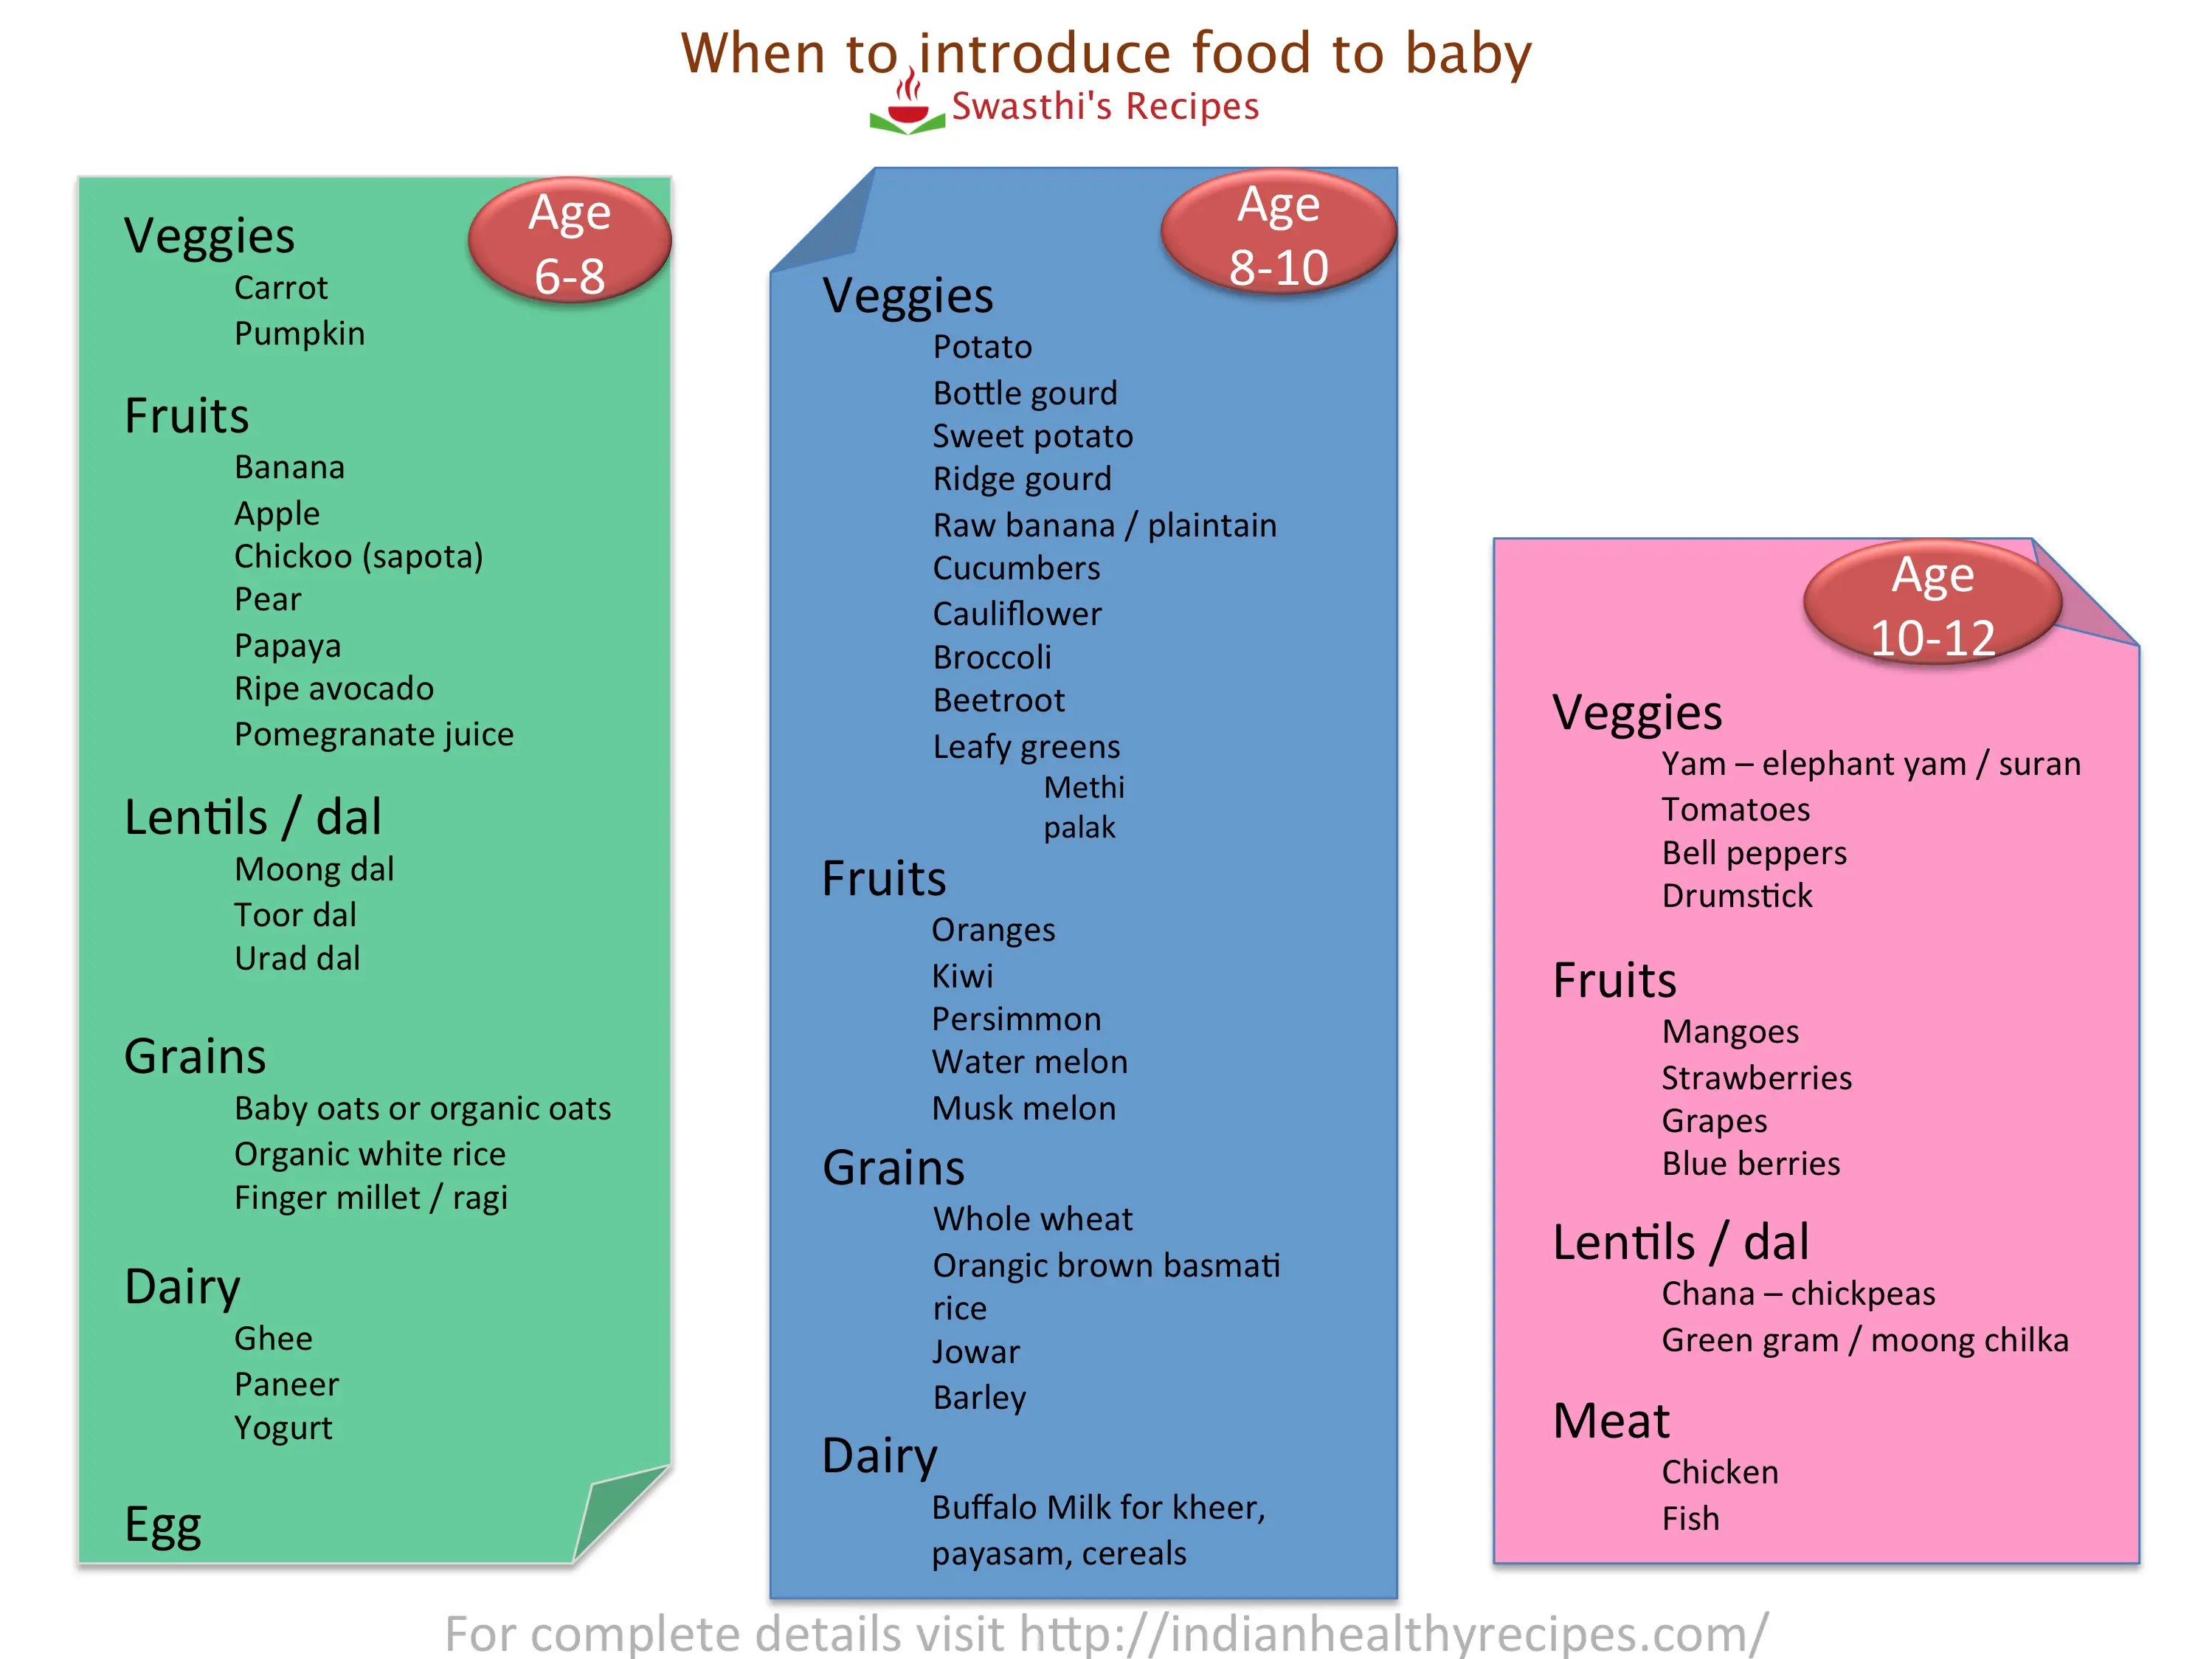 https://www.indianhealthyrecipes.com/wp-content/uploads/2014/11/Baby-foood-chart-swasthis-recipes.jpg.webp